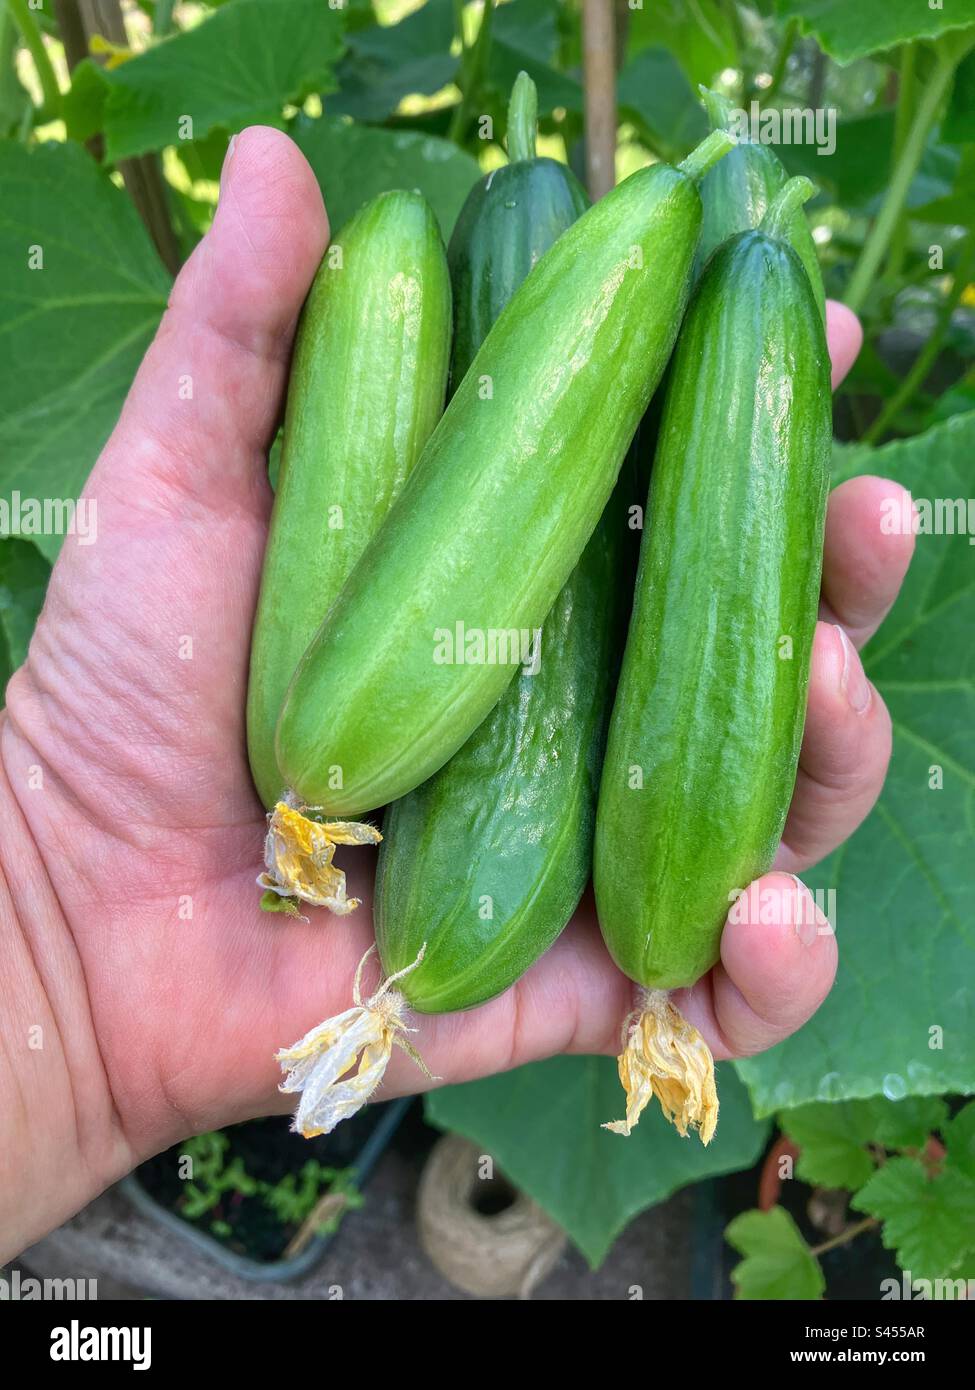 https://c8.alamy.com/comp/S455AR/homegrown-freshly-picked-organic-mini-cucumbers-in-womans-hand-close-up-S455AR.jpg